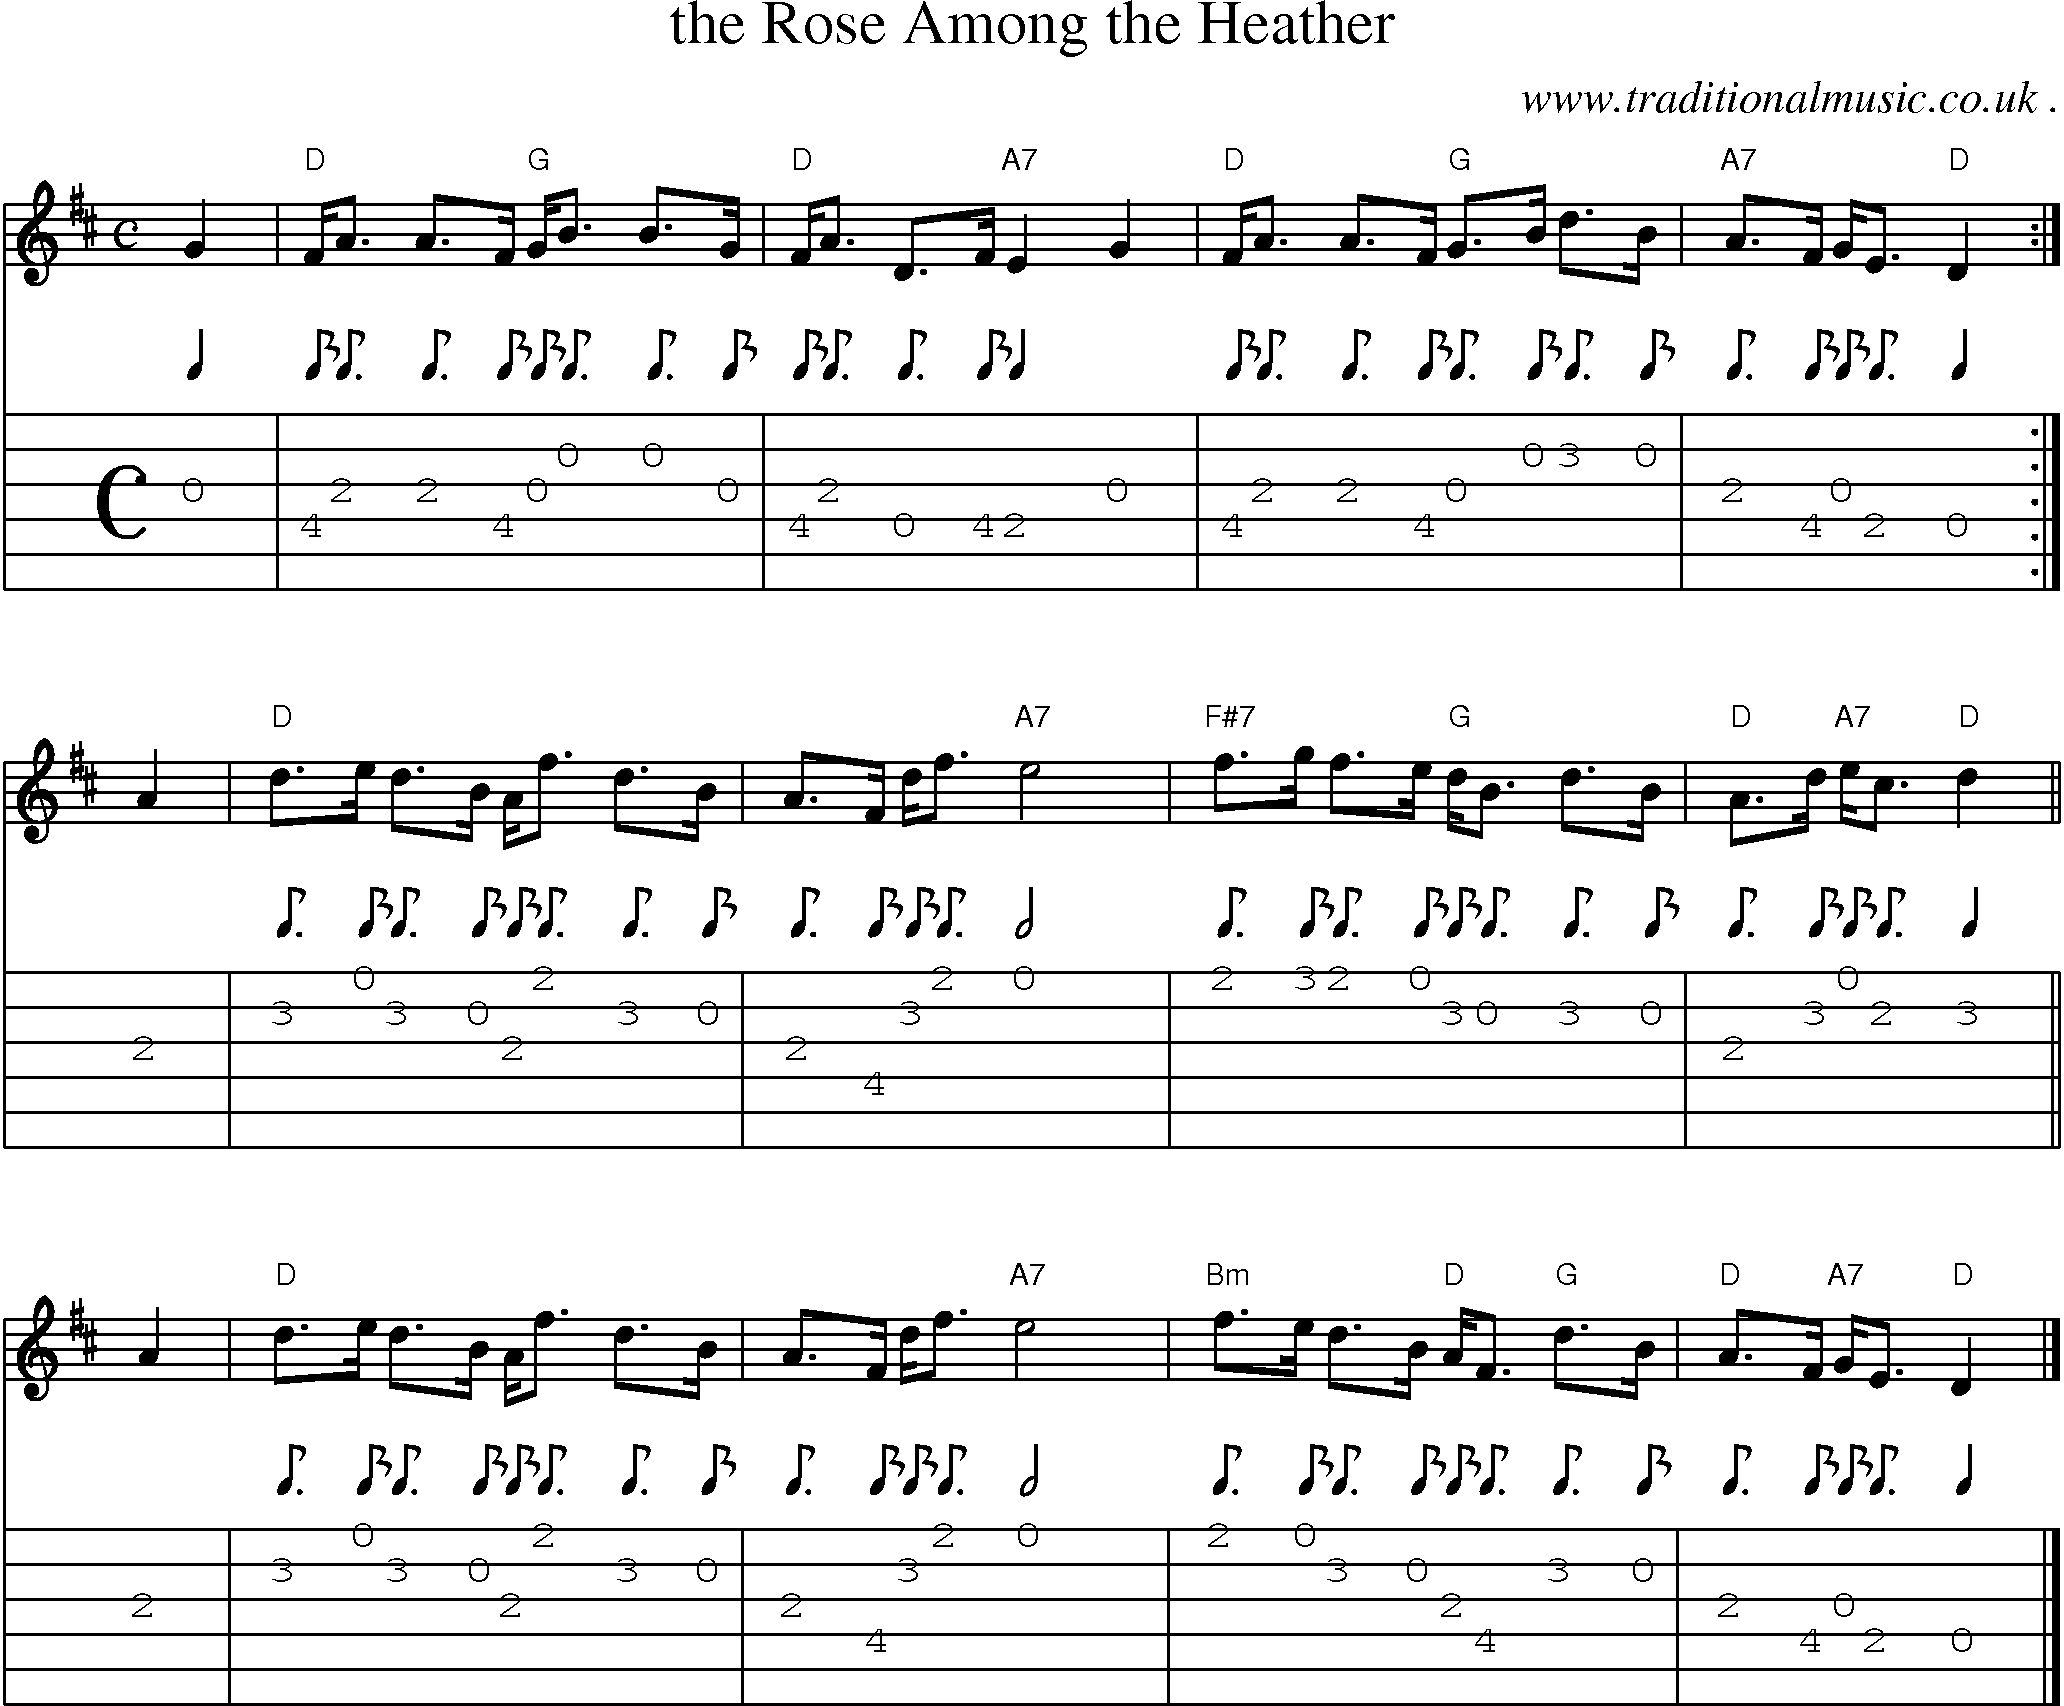 Sheet-music  score, Chords and Guitar Tabs for The Rose Among The Heather